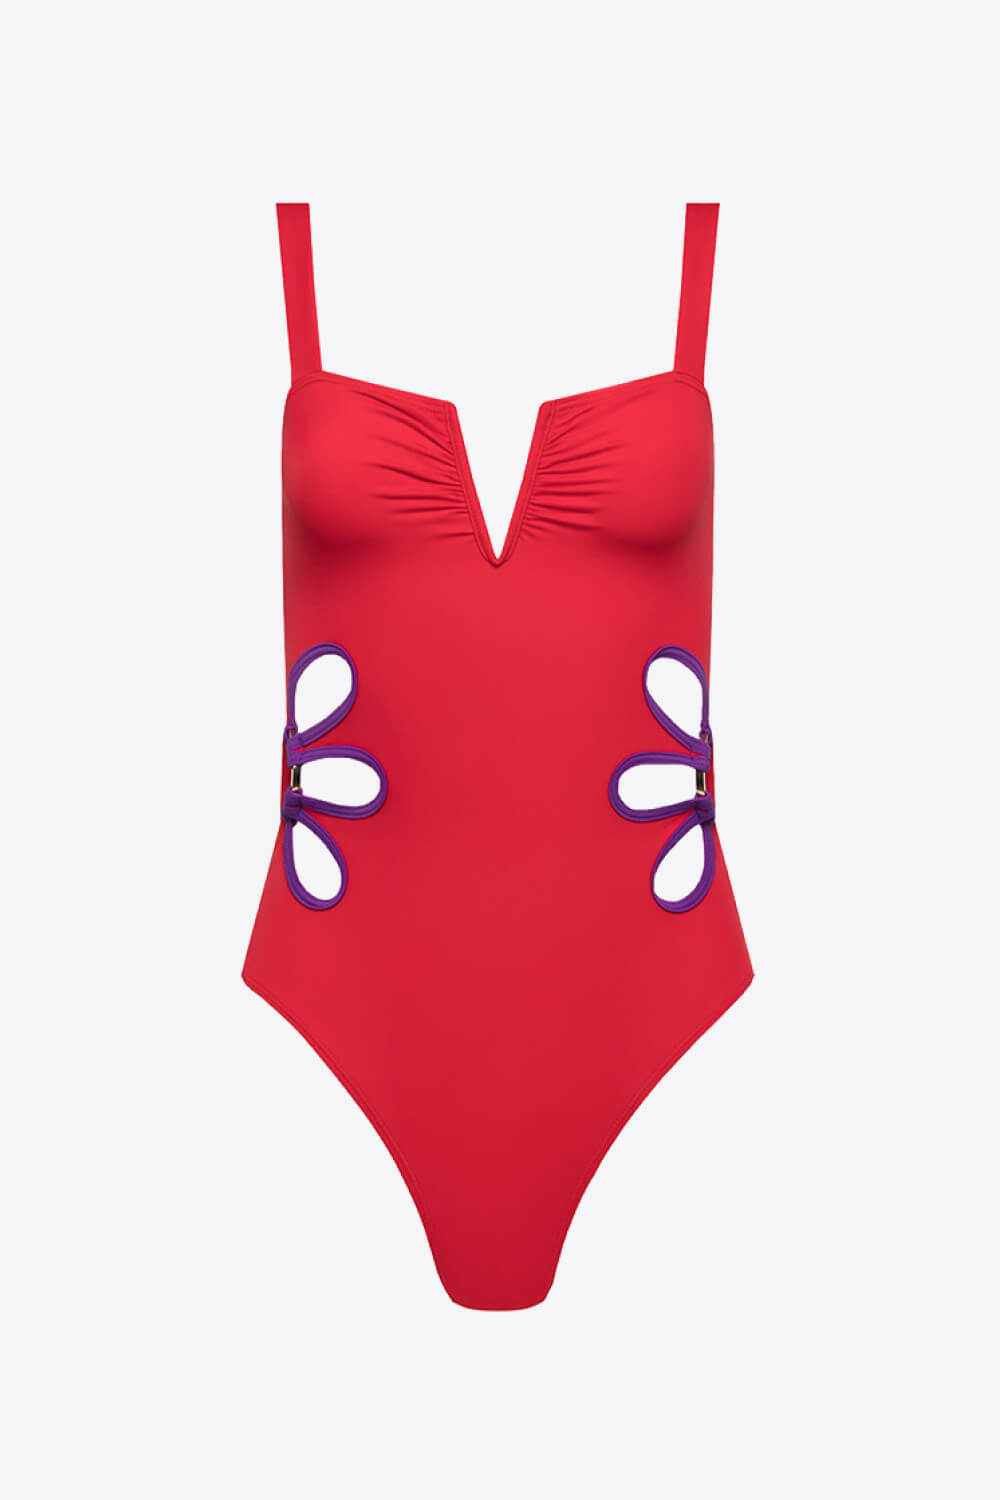 Notched Neckline Swimsuit: A fashionable swimsuit featuring a unique notched neckline for a touch of elegance and style by the water.